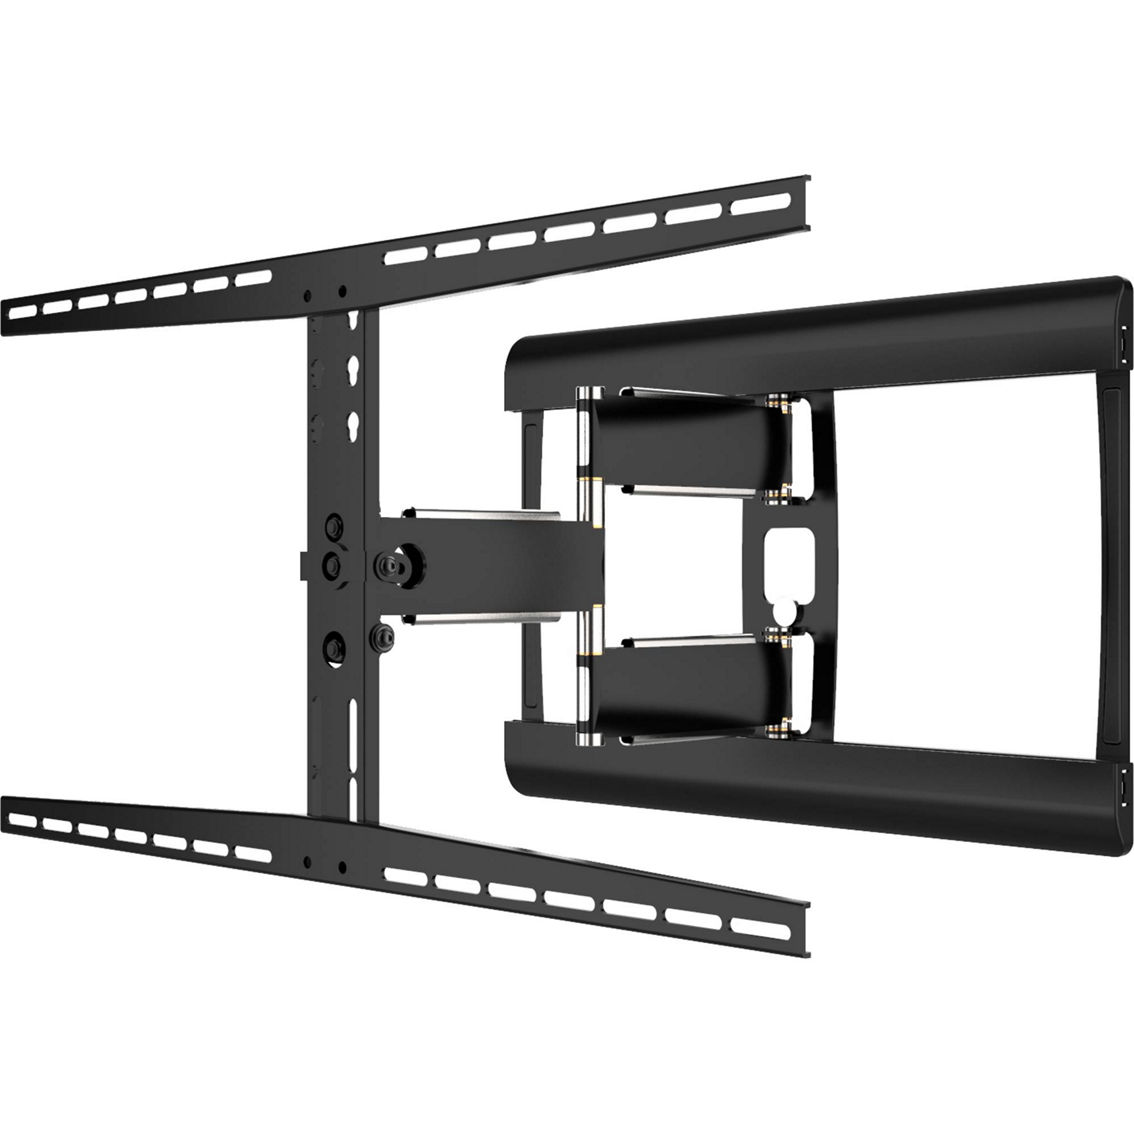 ProMounts Pro Full Motion TV Wall Mount for 37 to 85 in. TVs up to 120 lb. - Image 1 of 10